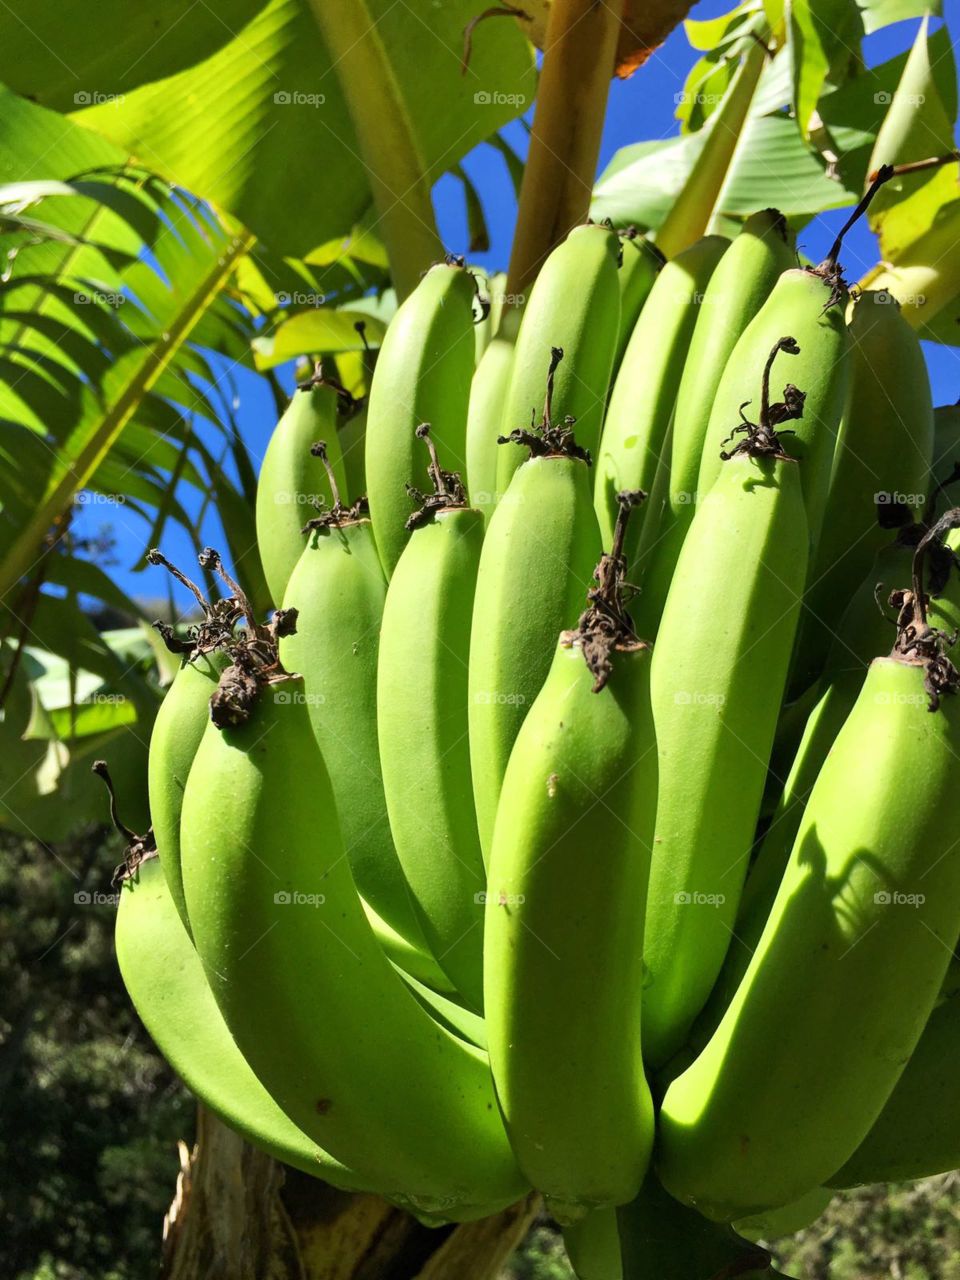 bananas in a tree